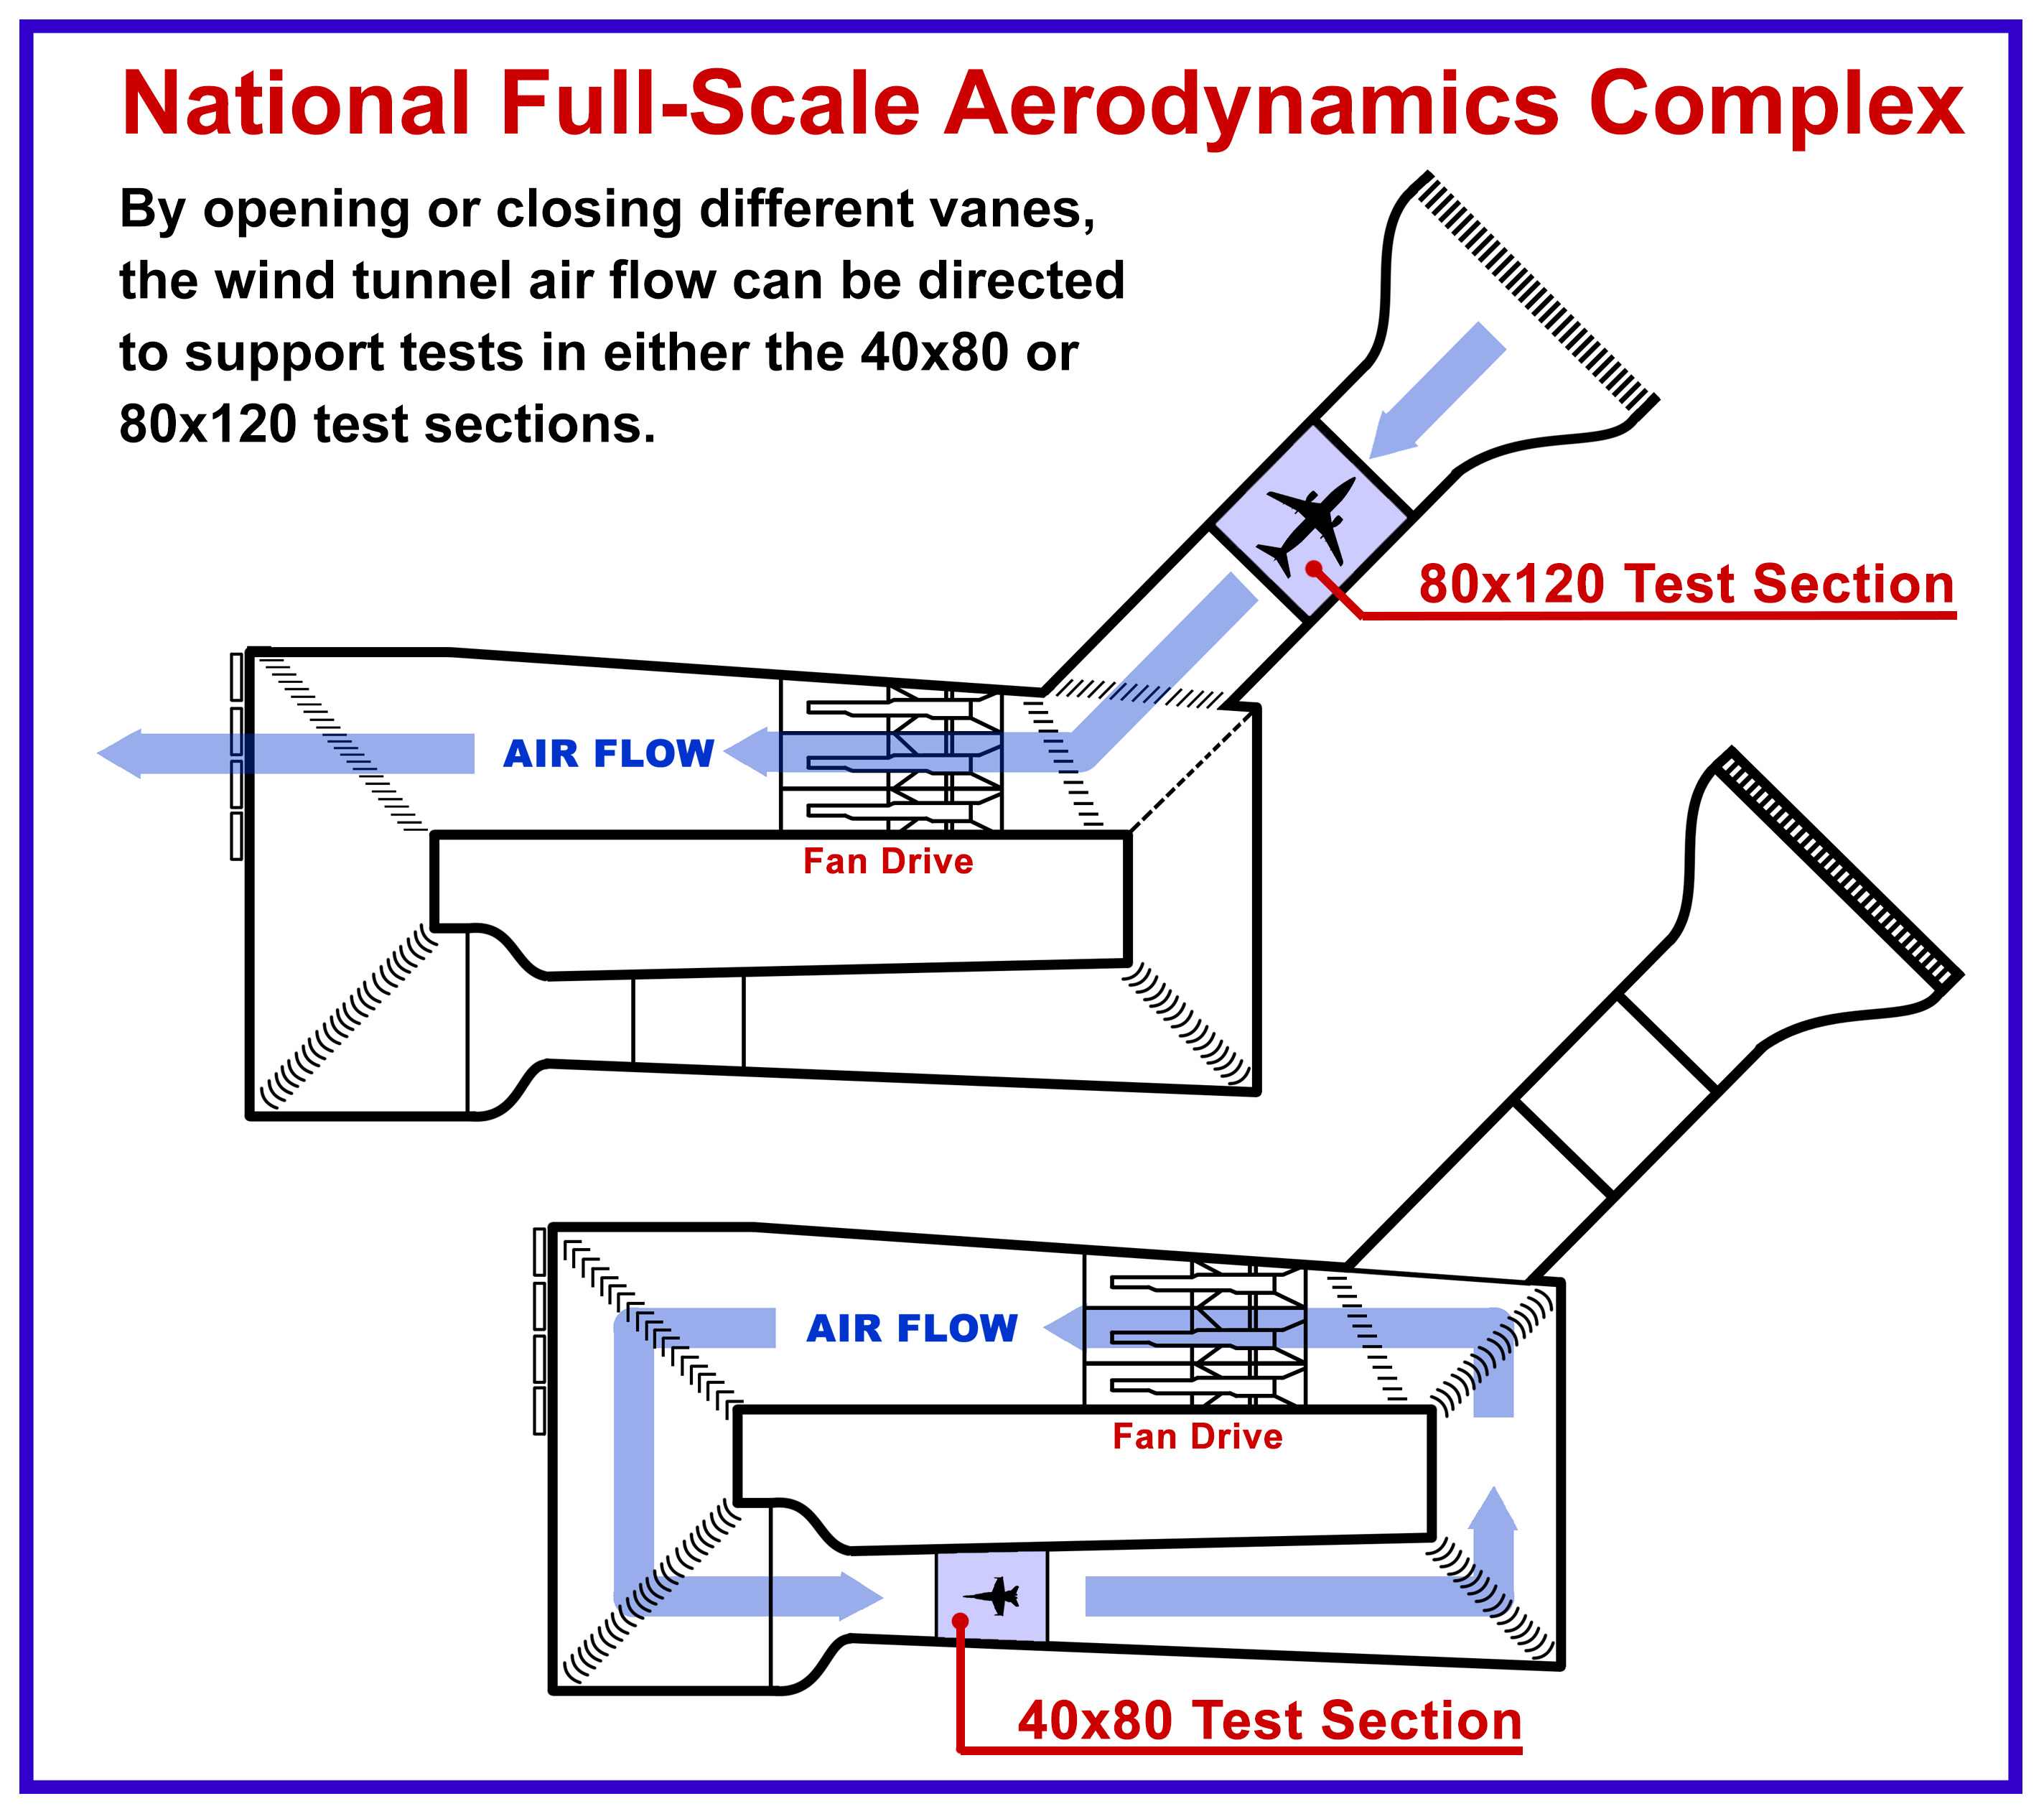 Diagram of the National Full-Scale Aerodynamics Complex. The top graphic shows the 80x120 test section while the bottom graphic shows the 40x7=80 test sectuib,